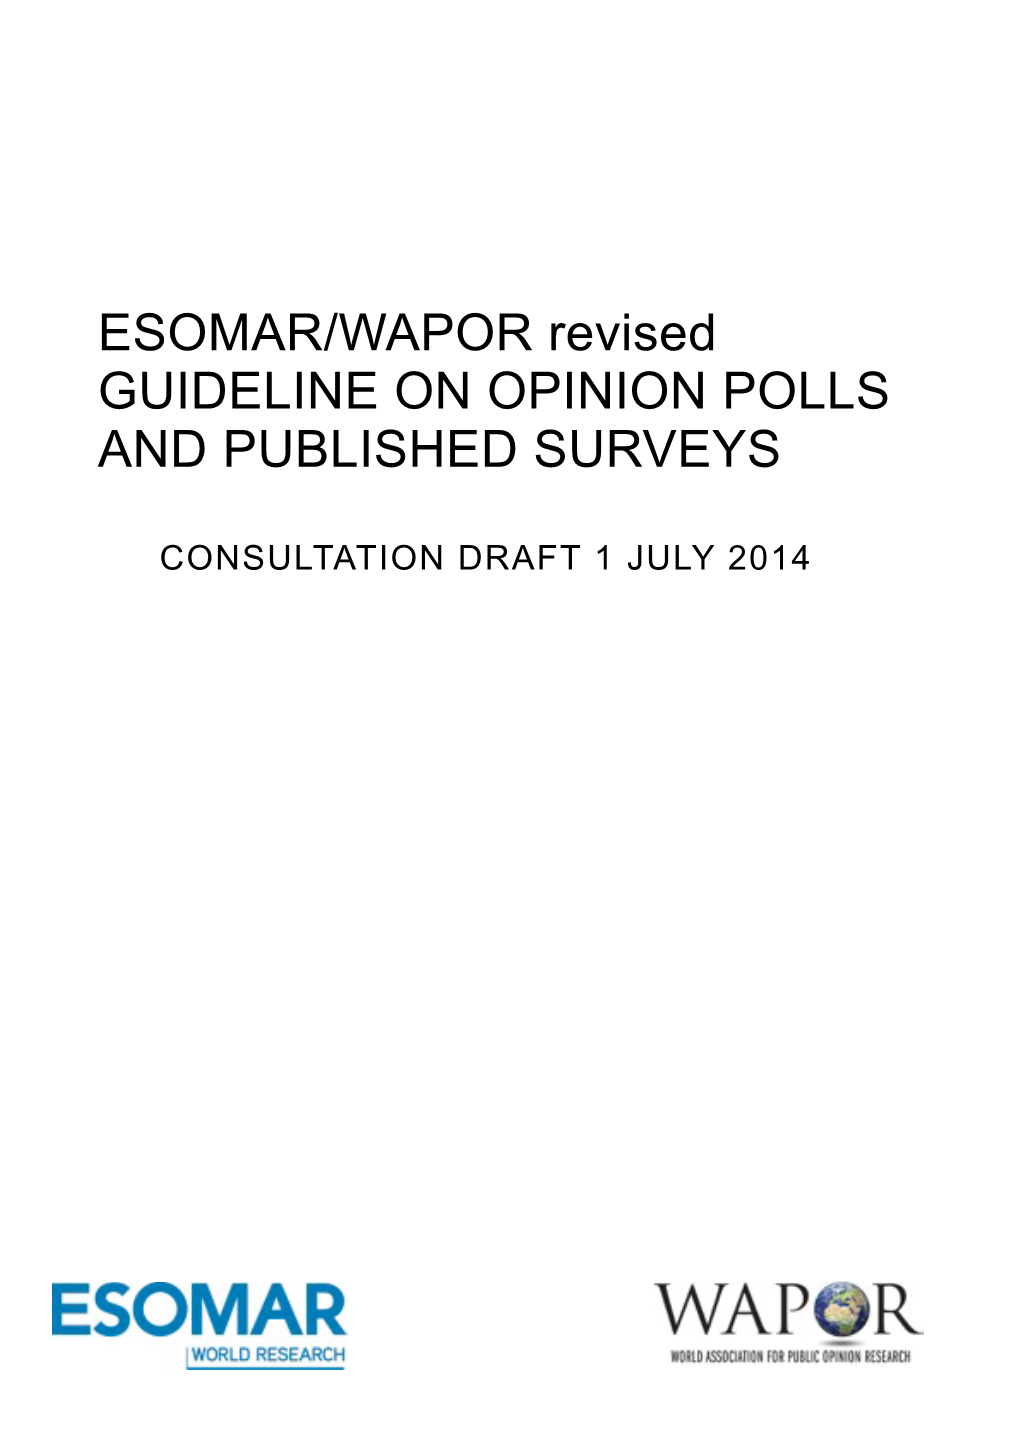 ESOMAR WAPOR Guideline on Opinion Polls Draft PAGES